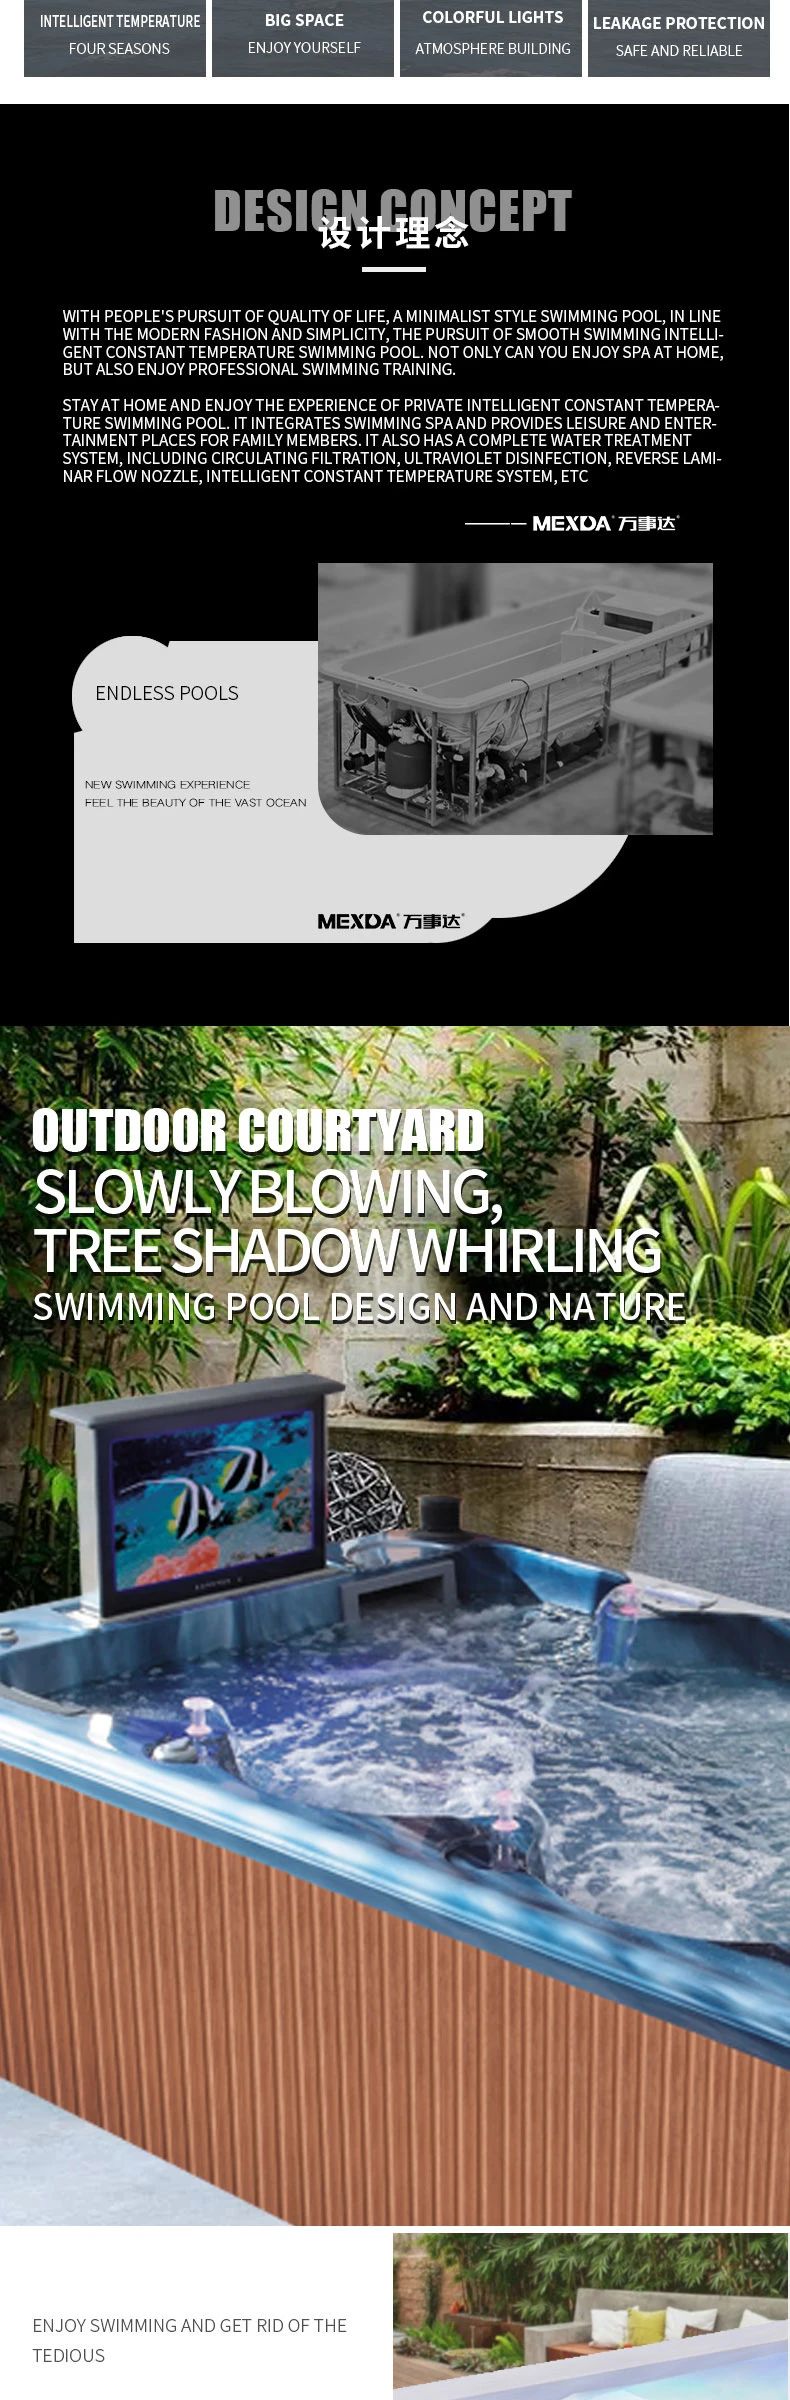 Outdoor Garden Swim SPA with Pop-up Speakers and Sand Filter